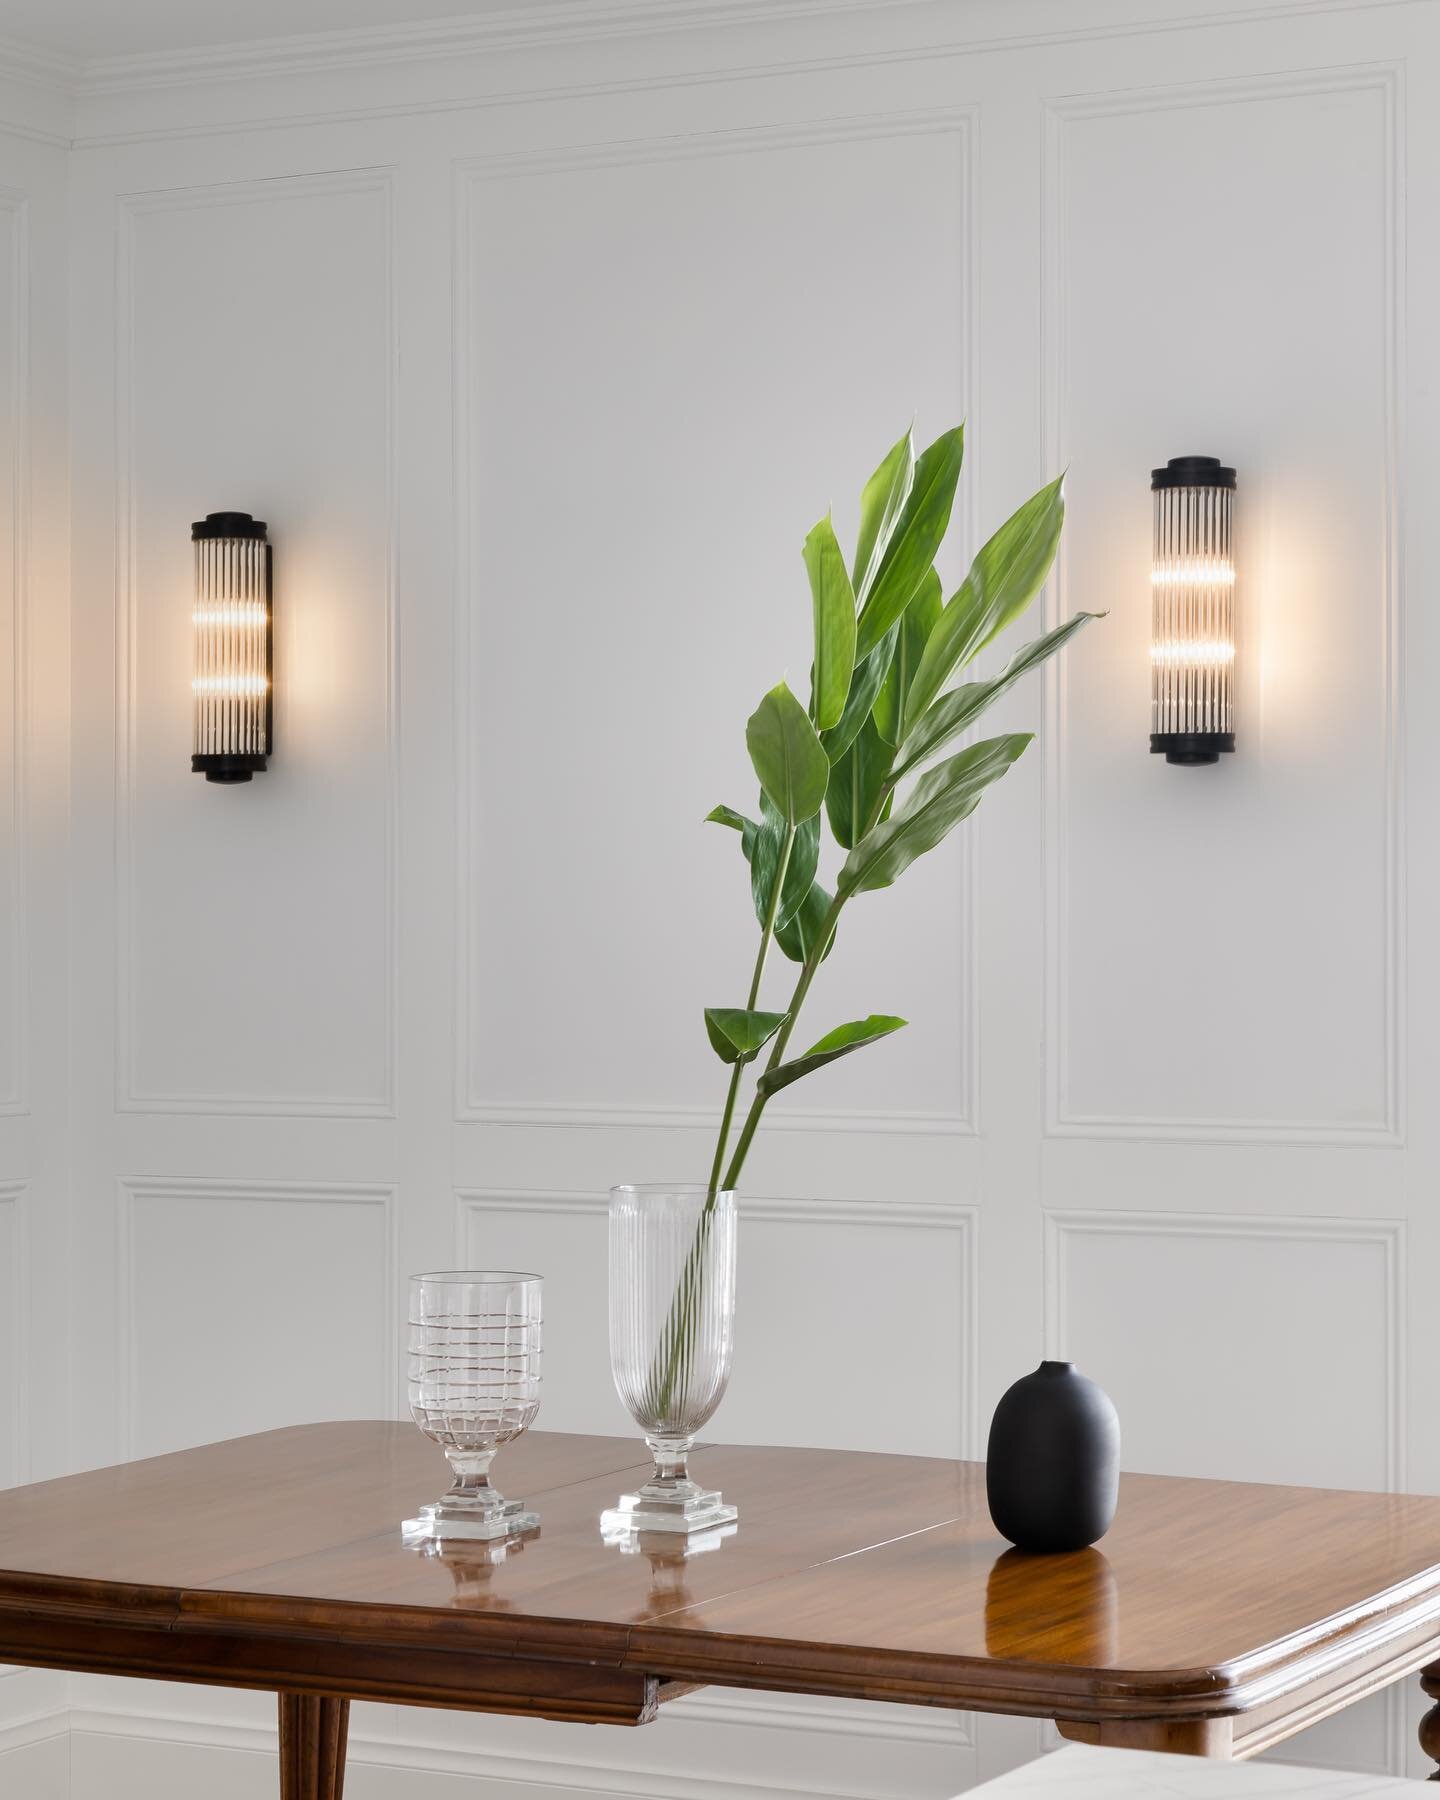 Turning a crowded corner into a tranquil dining space. 

At #RupertsResidence we used bolection mouldings on walls to create refined detailing across crisp white walls. 

The use of aged brass wall sconces from @jamessaidcollections tied in beautiful